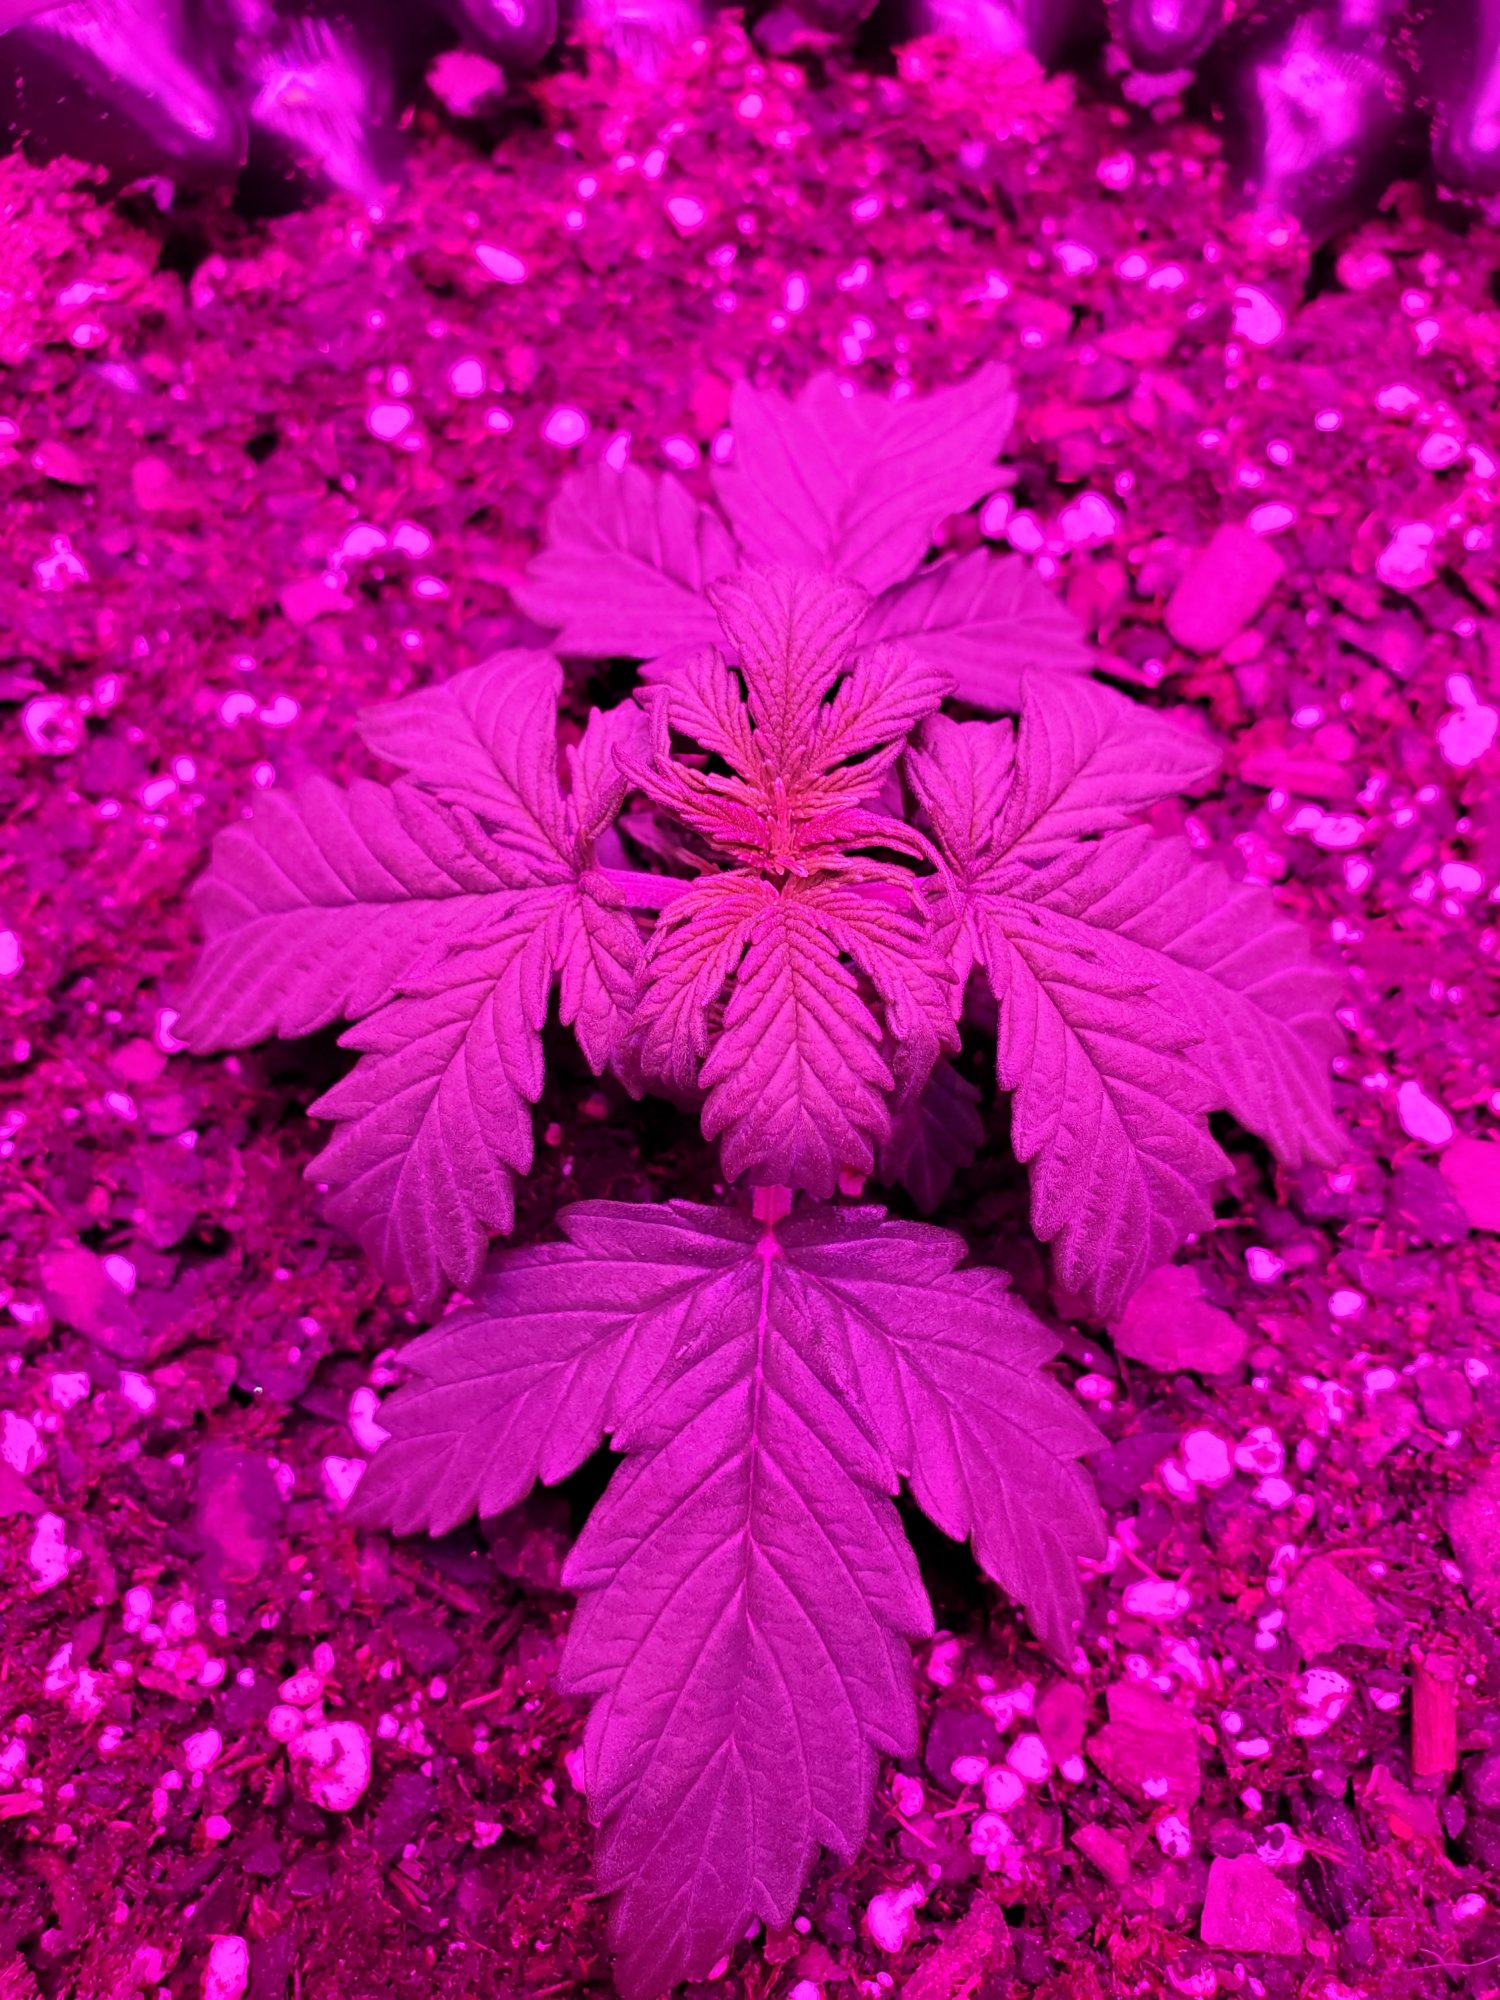 Does this one look sick16 days